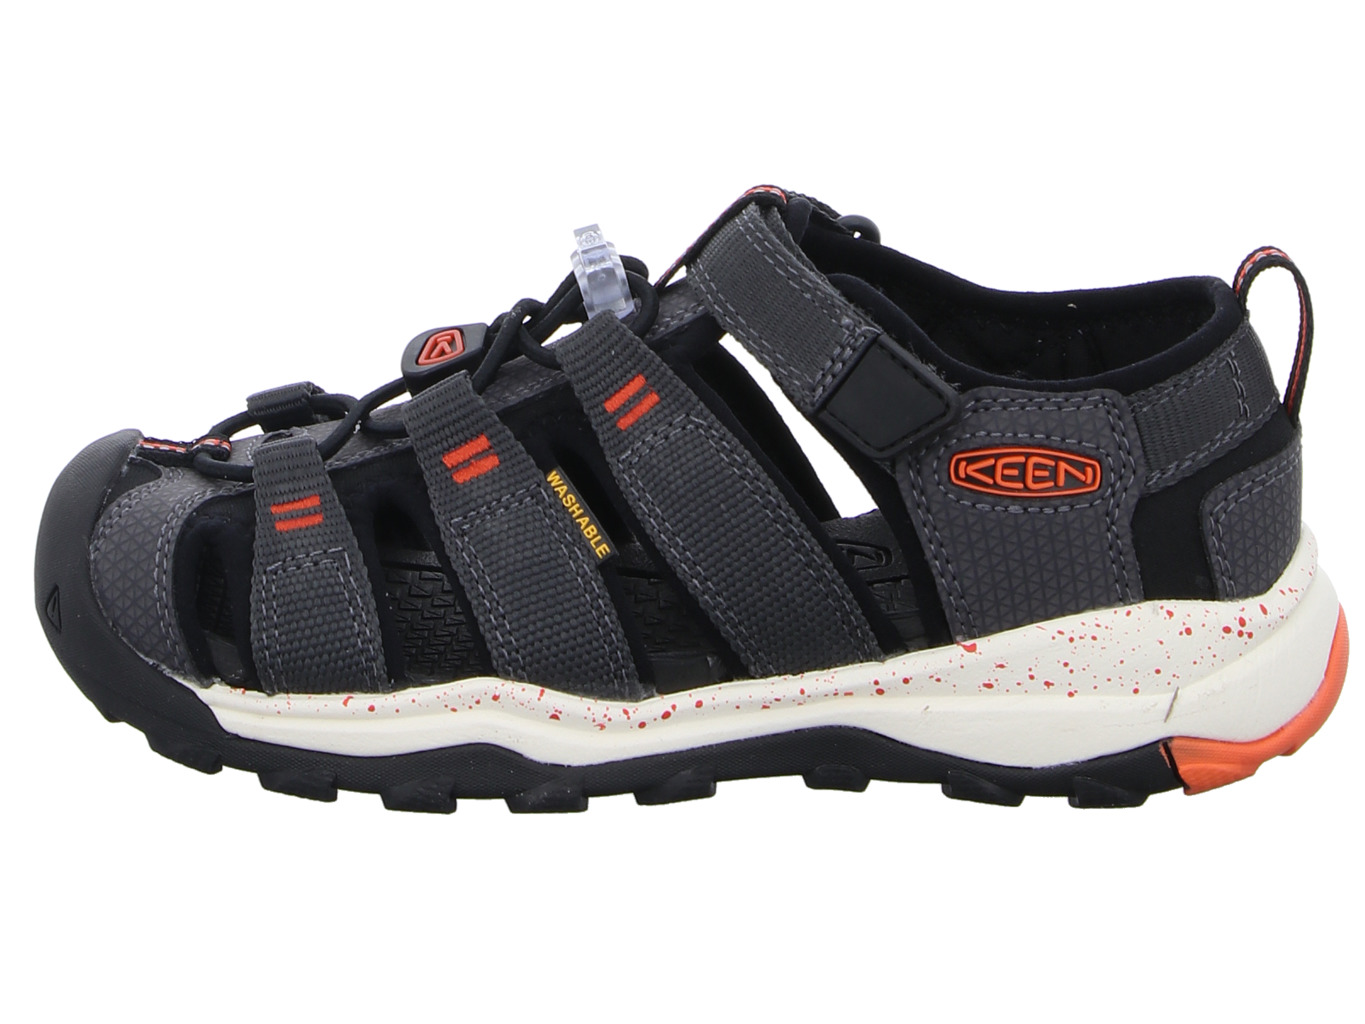 keen_newport_neo_h2_magnet_spicy_or_1018426_na_3224